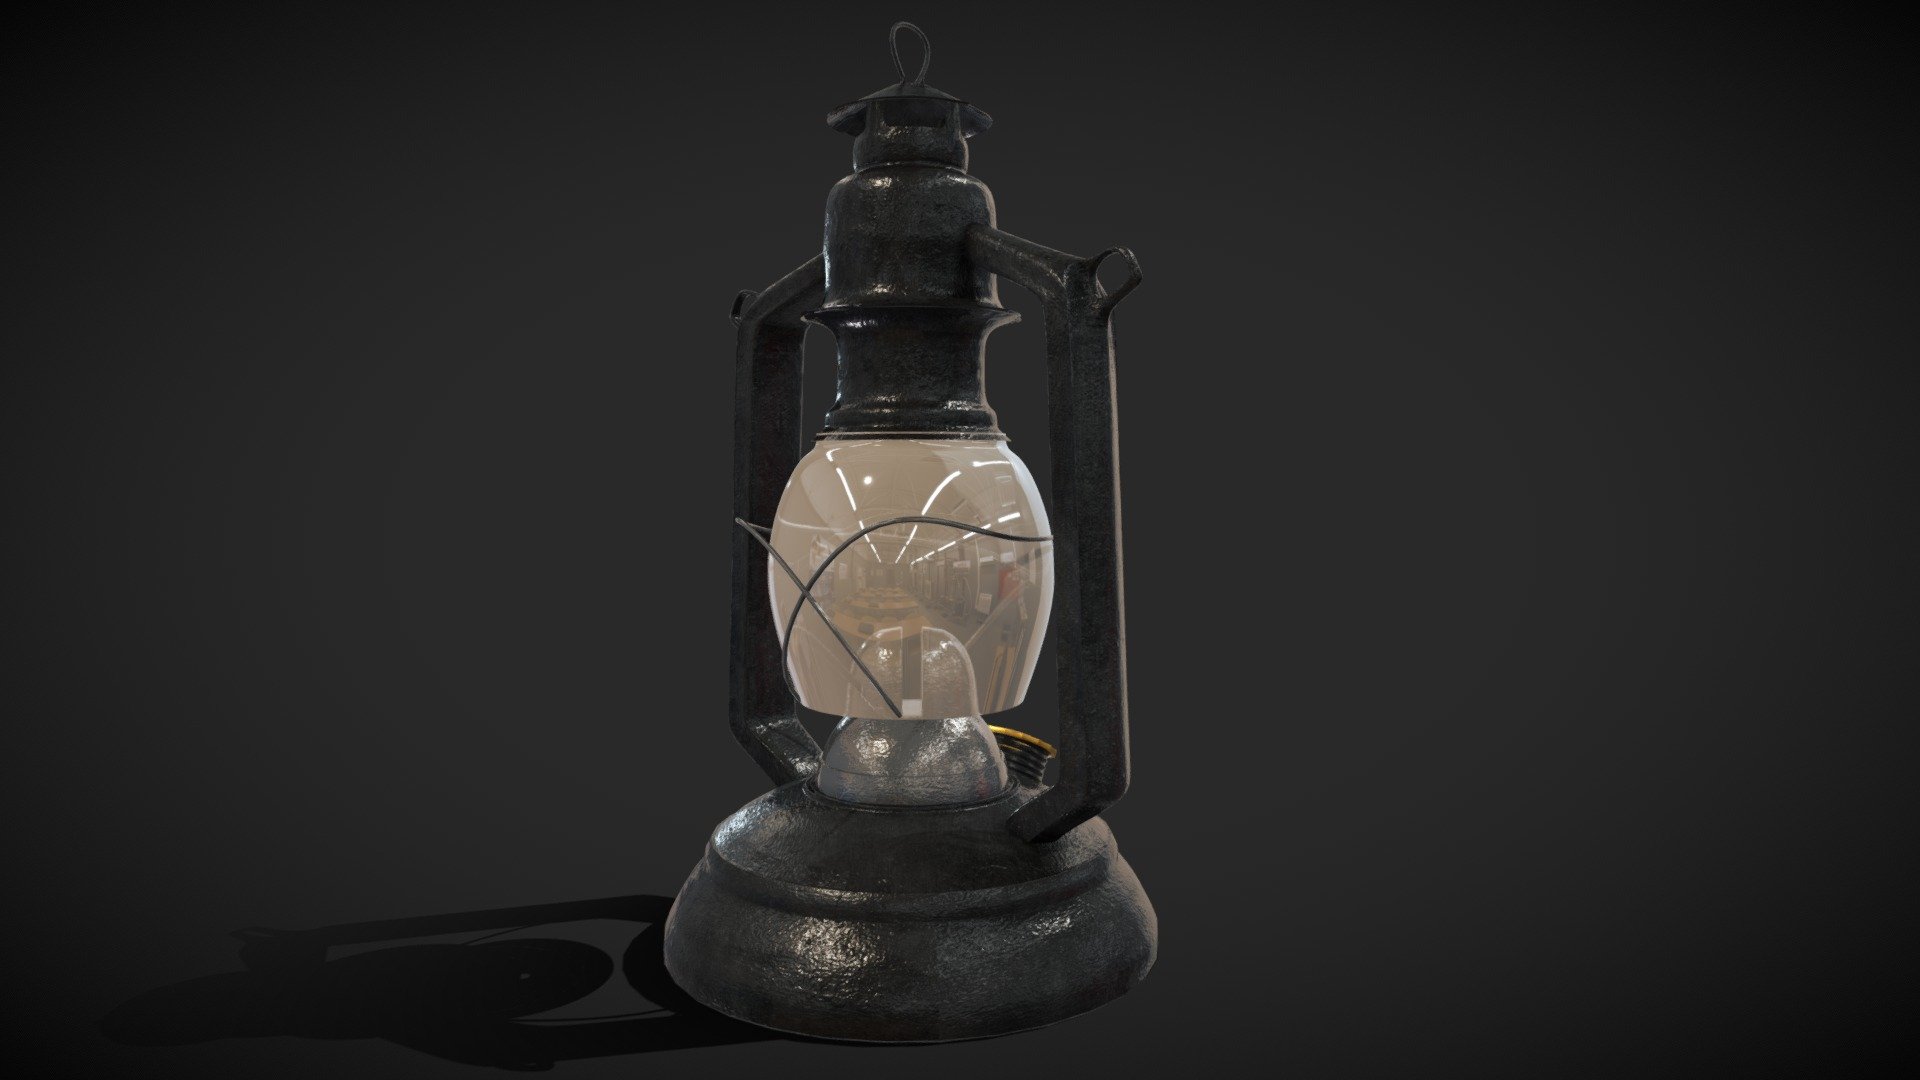 A game ready, low poly lantern
referenced from a lantern in the 1950s.
You may use this asset however you like in games or animations but do not sell it, even for free.

An asset I made for project BRINK - Lantern 1950s - 3D model by object (@titaniumammas69) 3d model